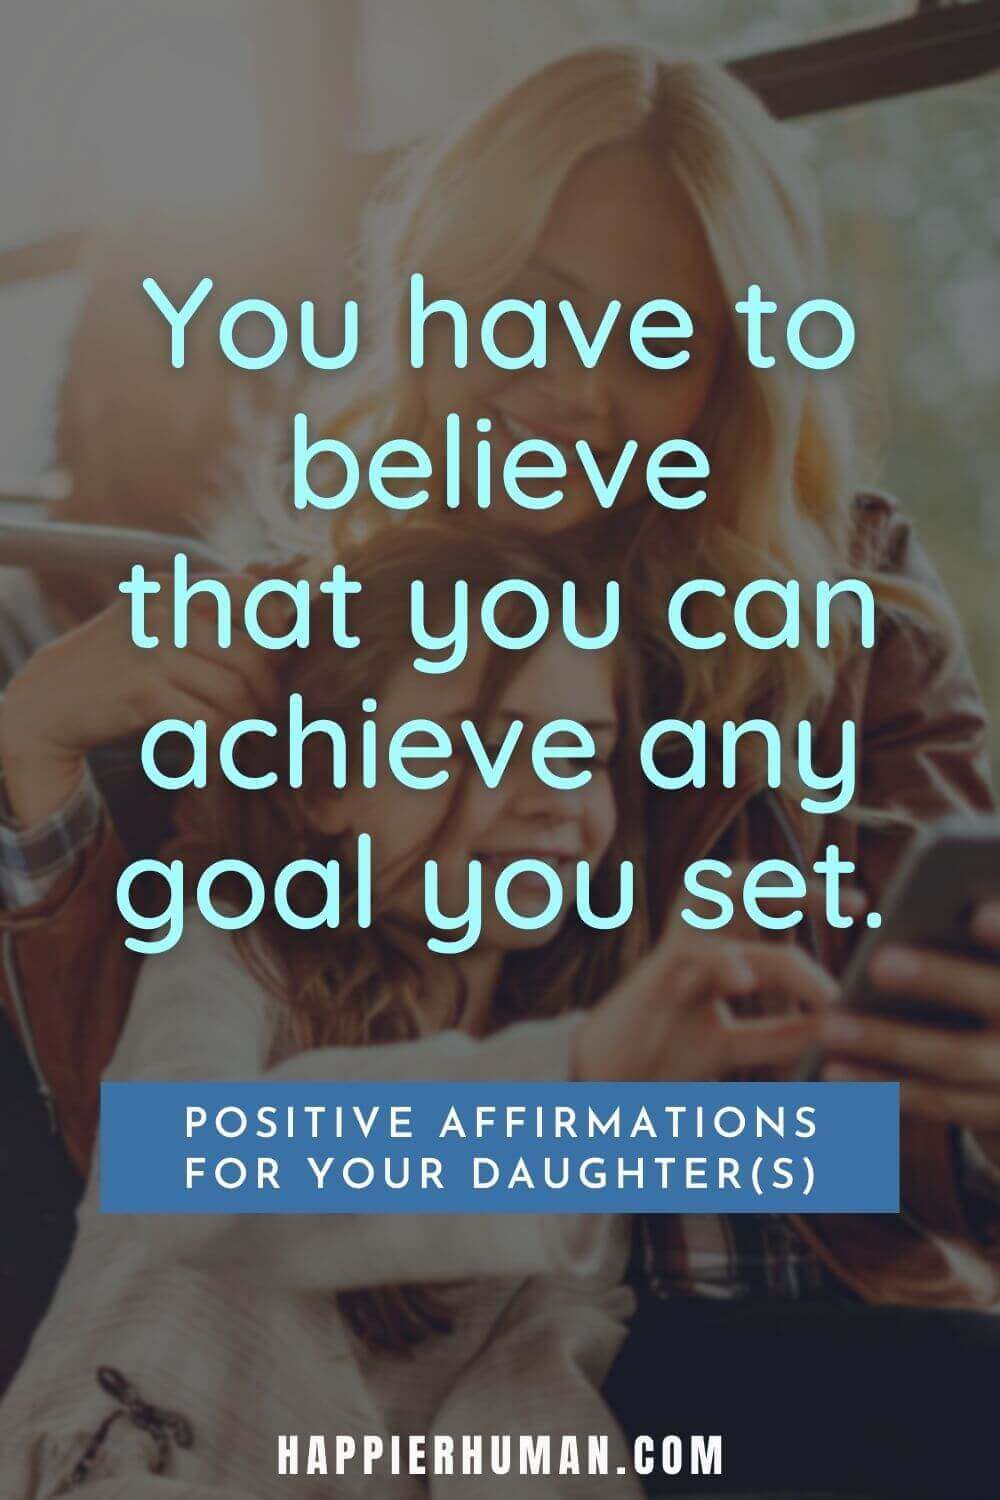 Affirmations for Daughters - You have to believe that you can achieve any goal you set. | affirmations for girlfriend | positive affirmations for black daughters | positive words for daughter